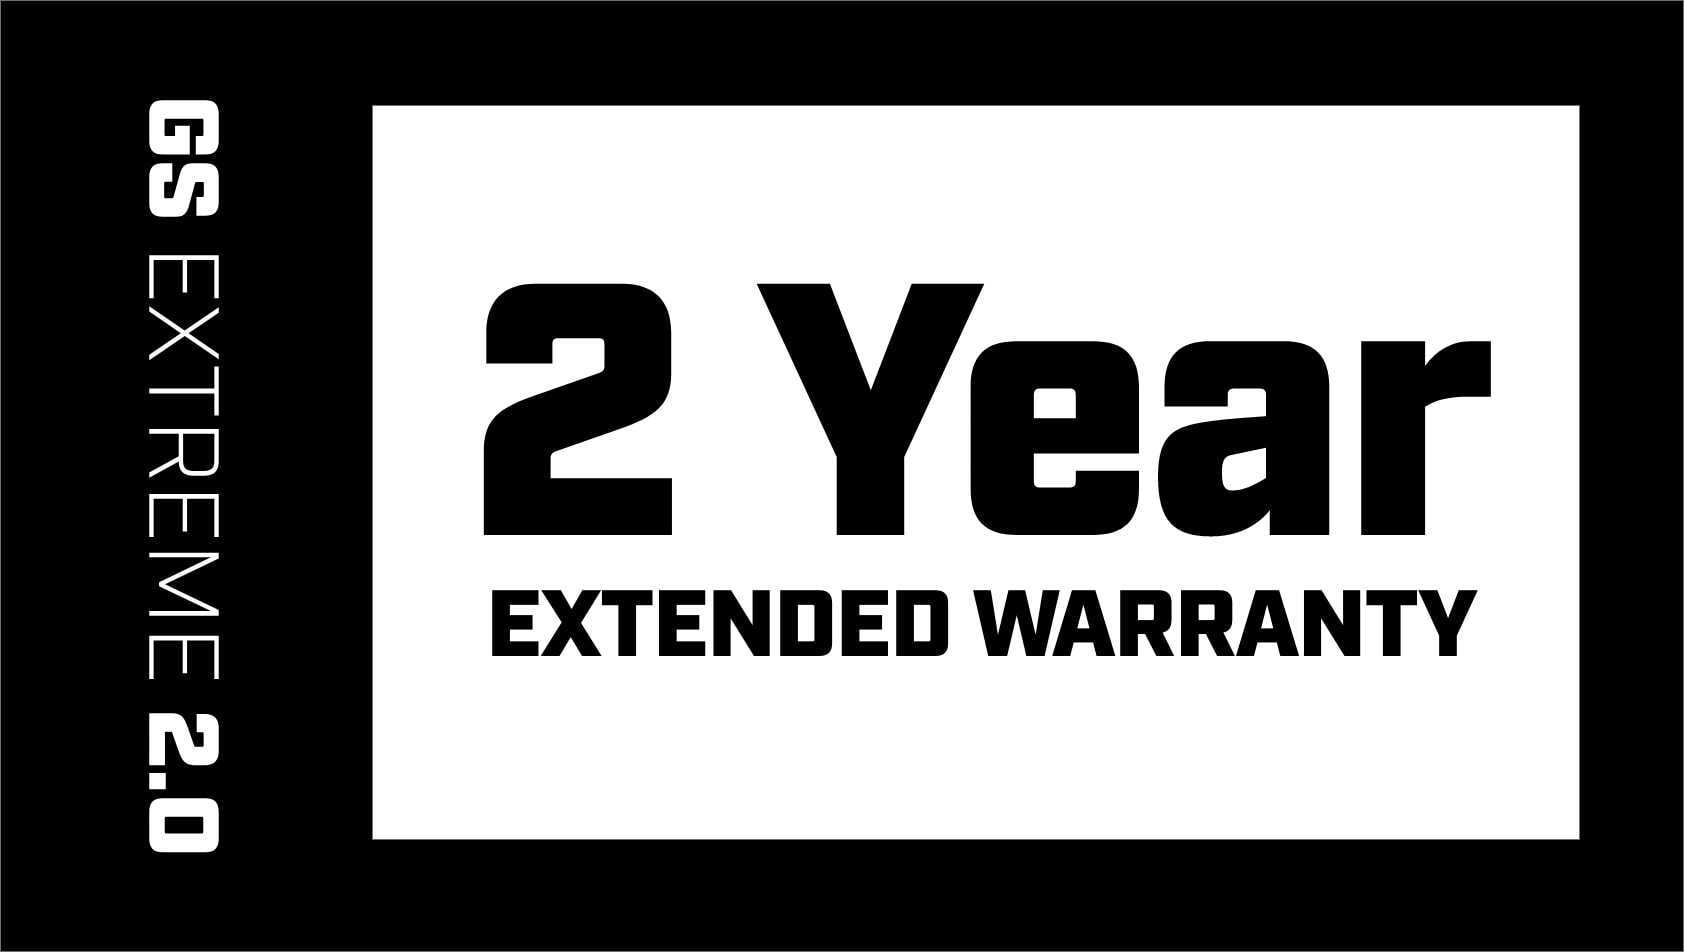 GS Extreme 2 Year Extended Warranty